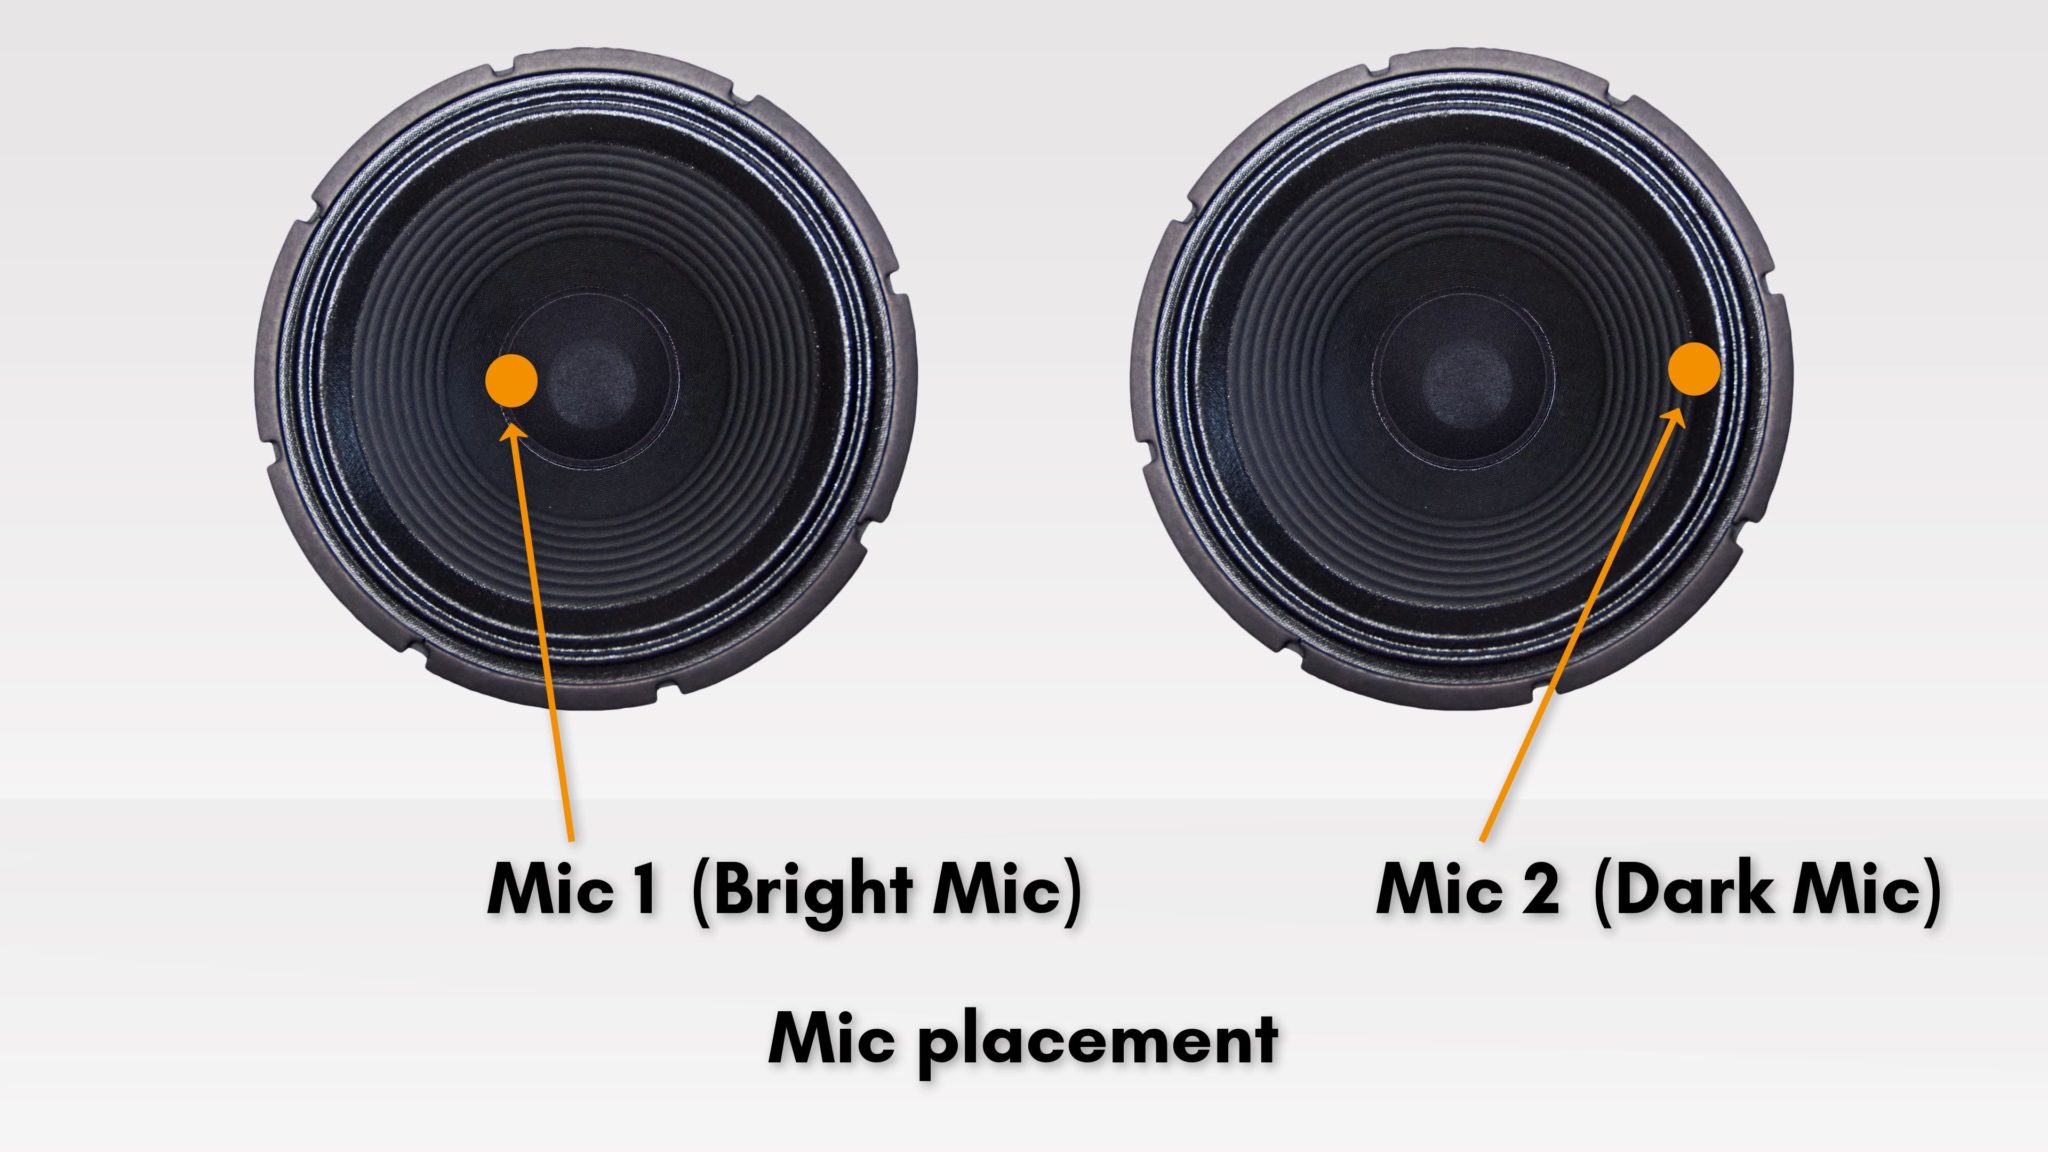 Illustration of different mic placements on a guitar speaker. Cone: bright, Edge: dark